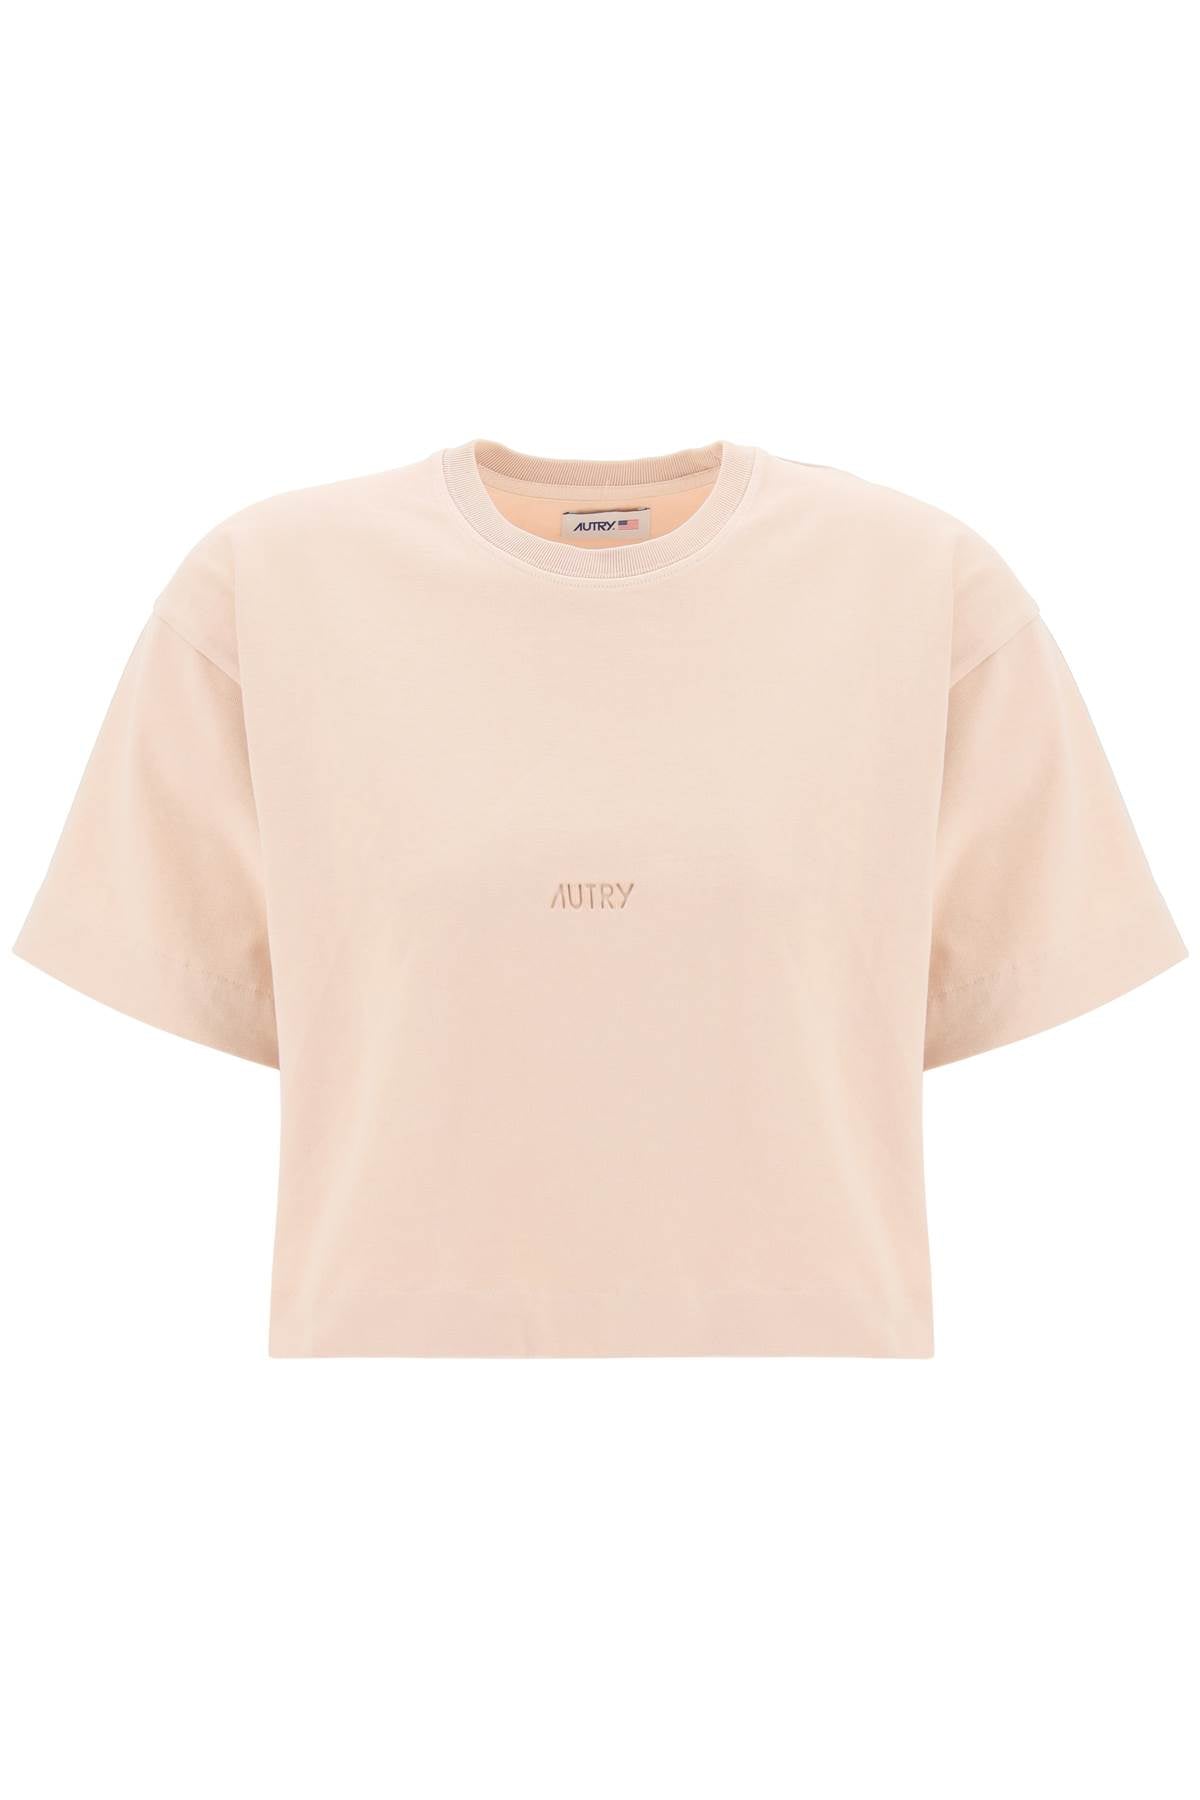 Autry boxy t-shirt with debossed logo-0